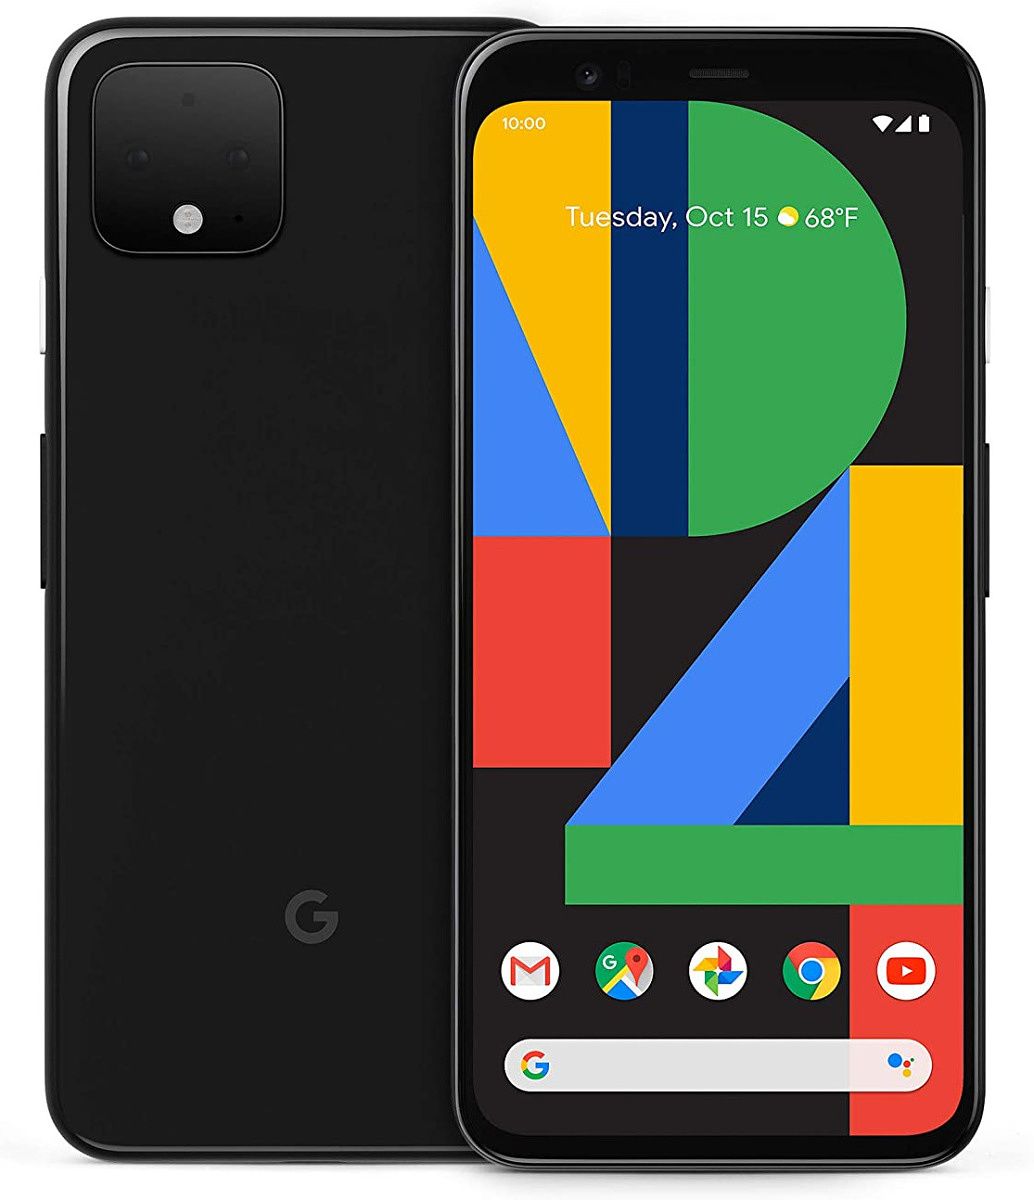 The smaller Pixel 4 is now on sale for $400 off the original price. B&H Photo has both colors available, while Amazon only has 'Just Black' in stock.